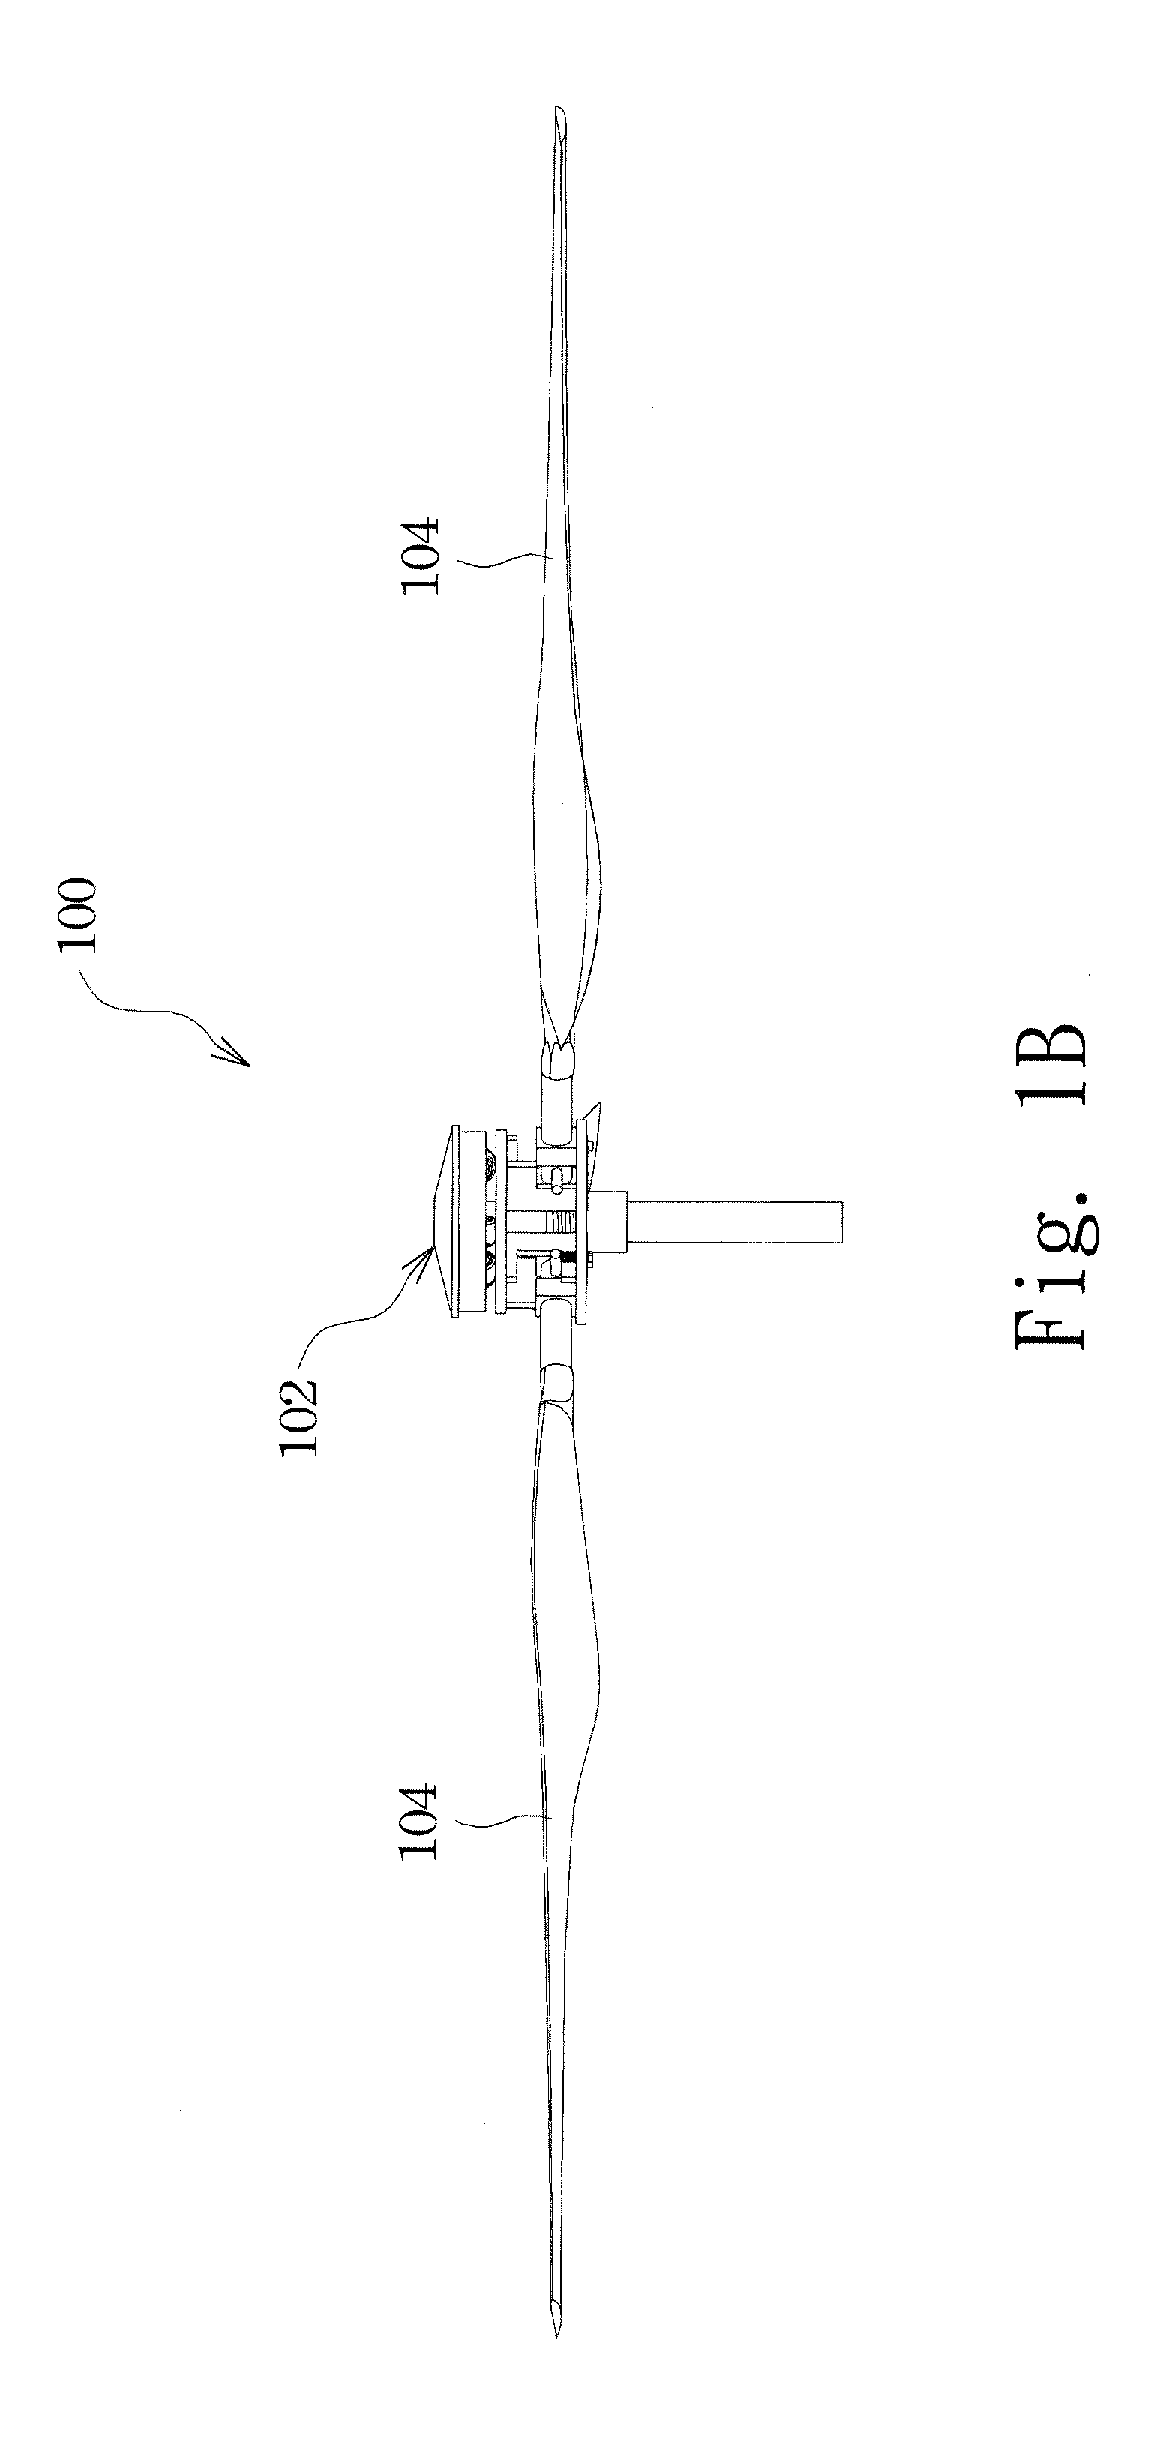 Blade pitch controlling apparatus and application thereof